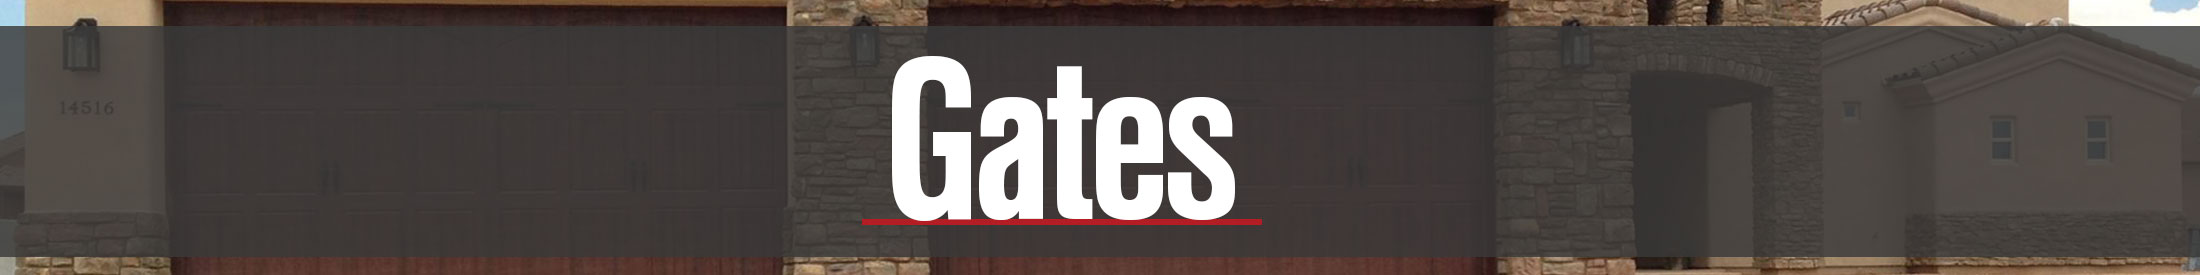 residential and commercial gates